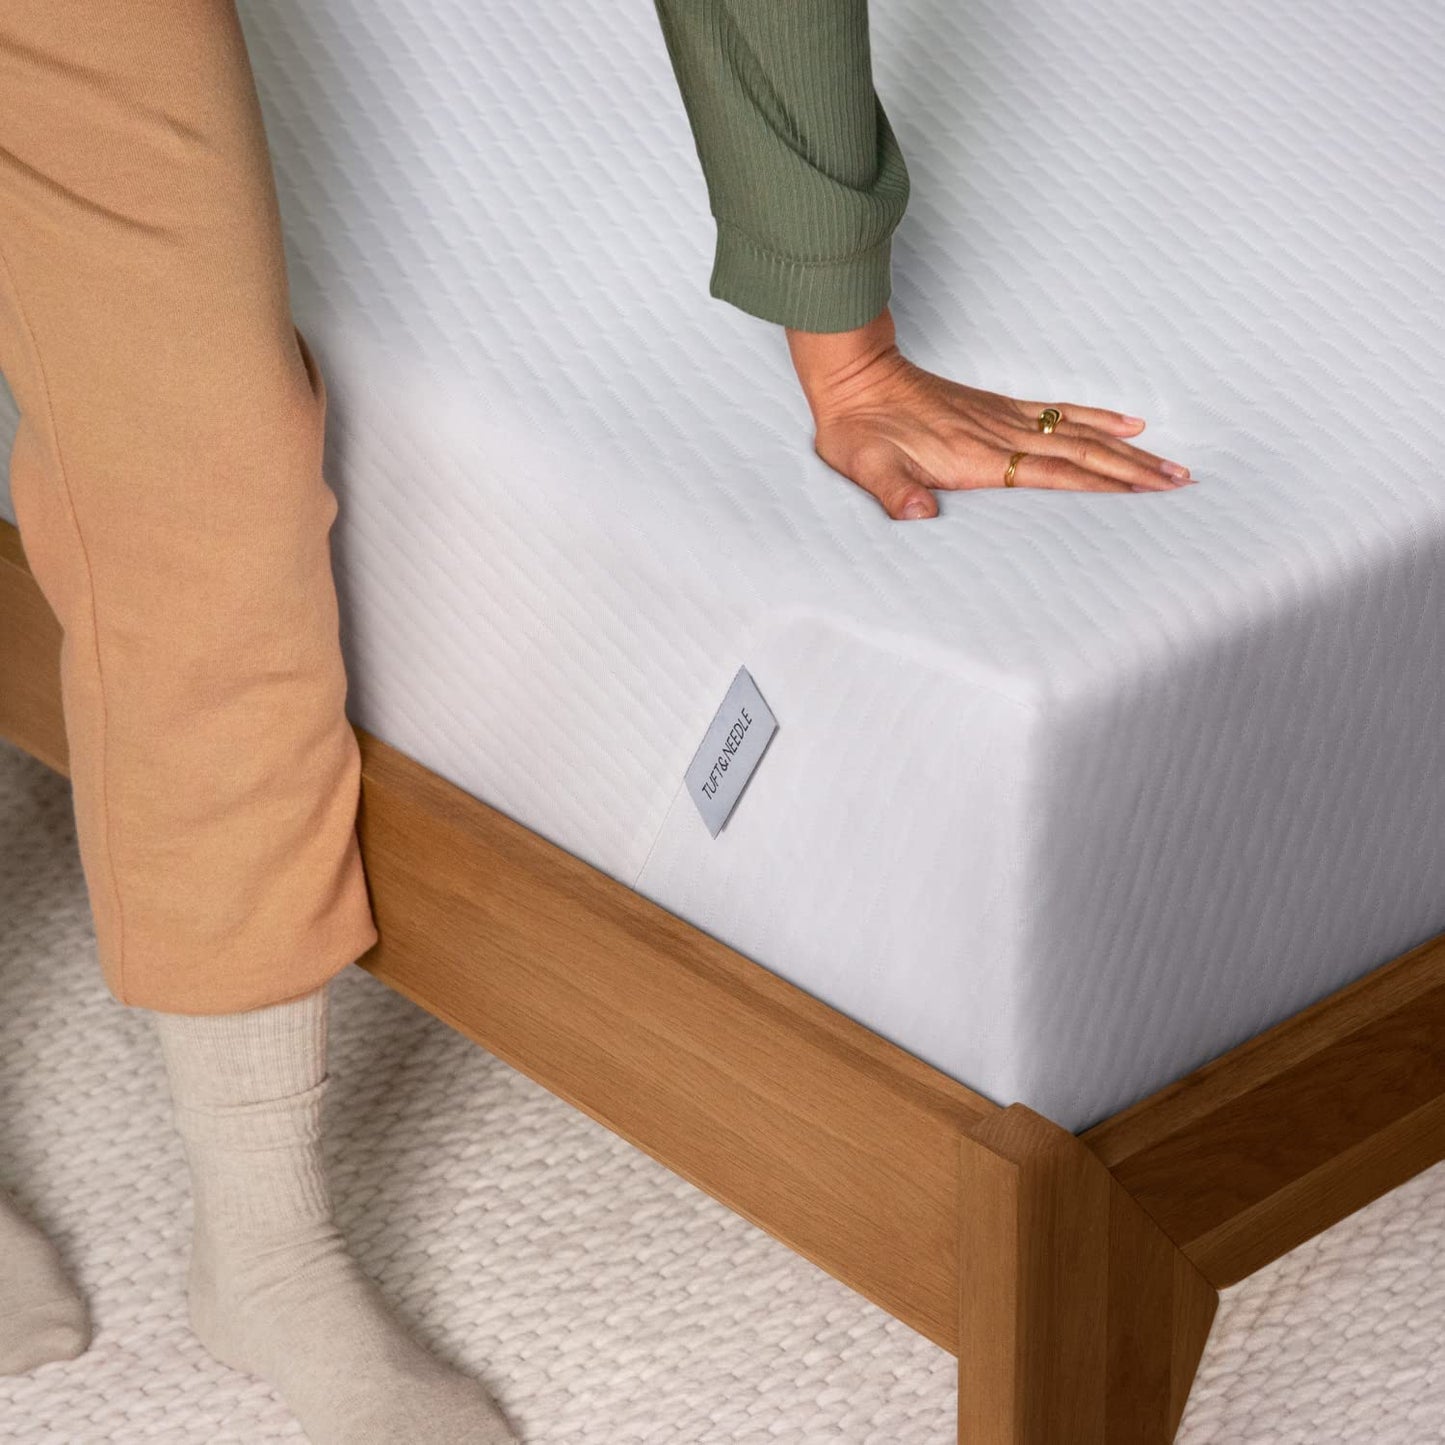 TUFT & NEEDLE - Original Limited Queen Adaptive Foam Mattress With Antimicrobial Protection Powered by HeiQ - CertiPUR-US - 100 Night Trial